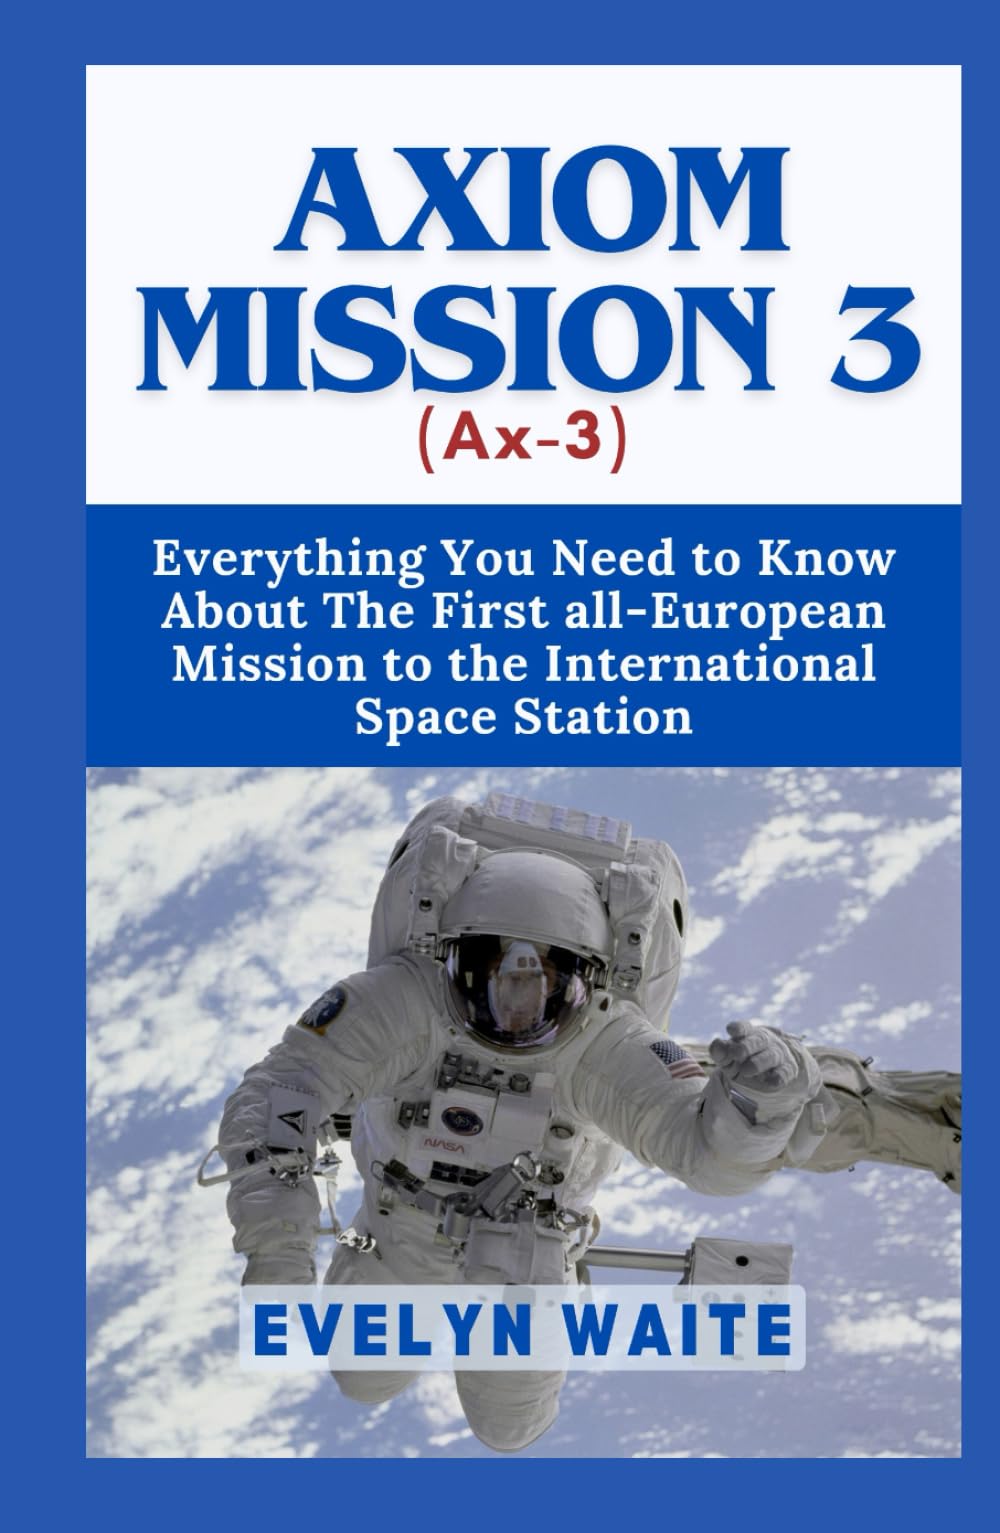 Axiom Mission 3 (Ax-3): Everything You Need to Know About The First all-European Mission to the International Space Station (Tech Evolution Chronicles, Band 16)